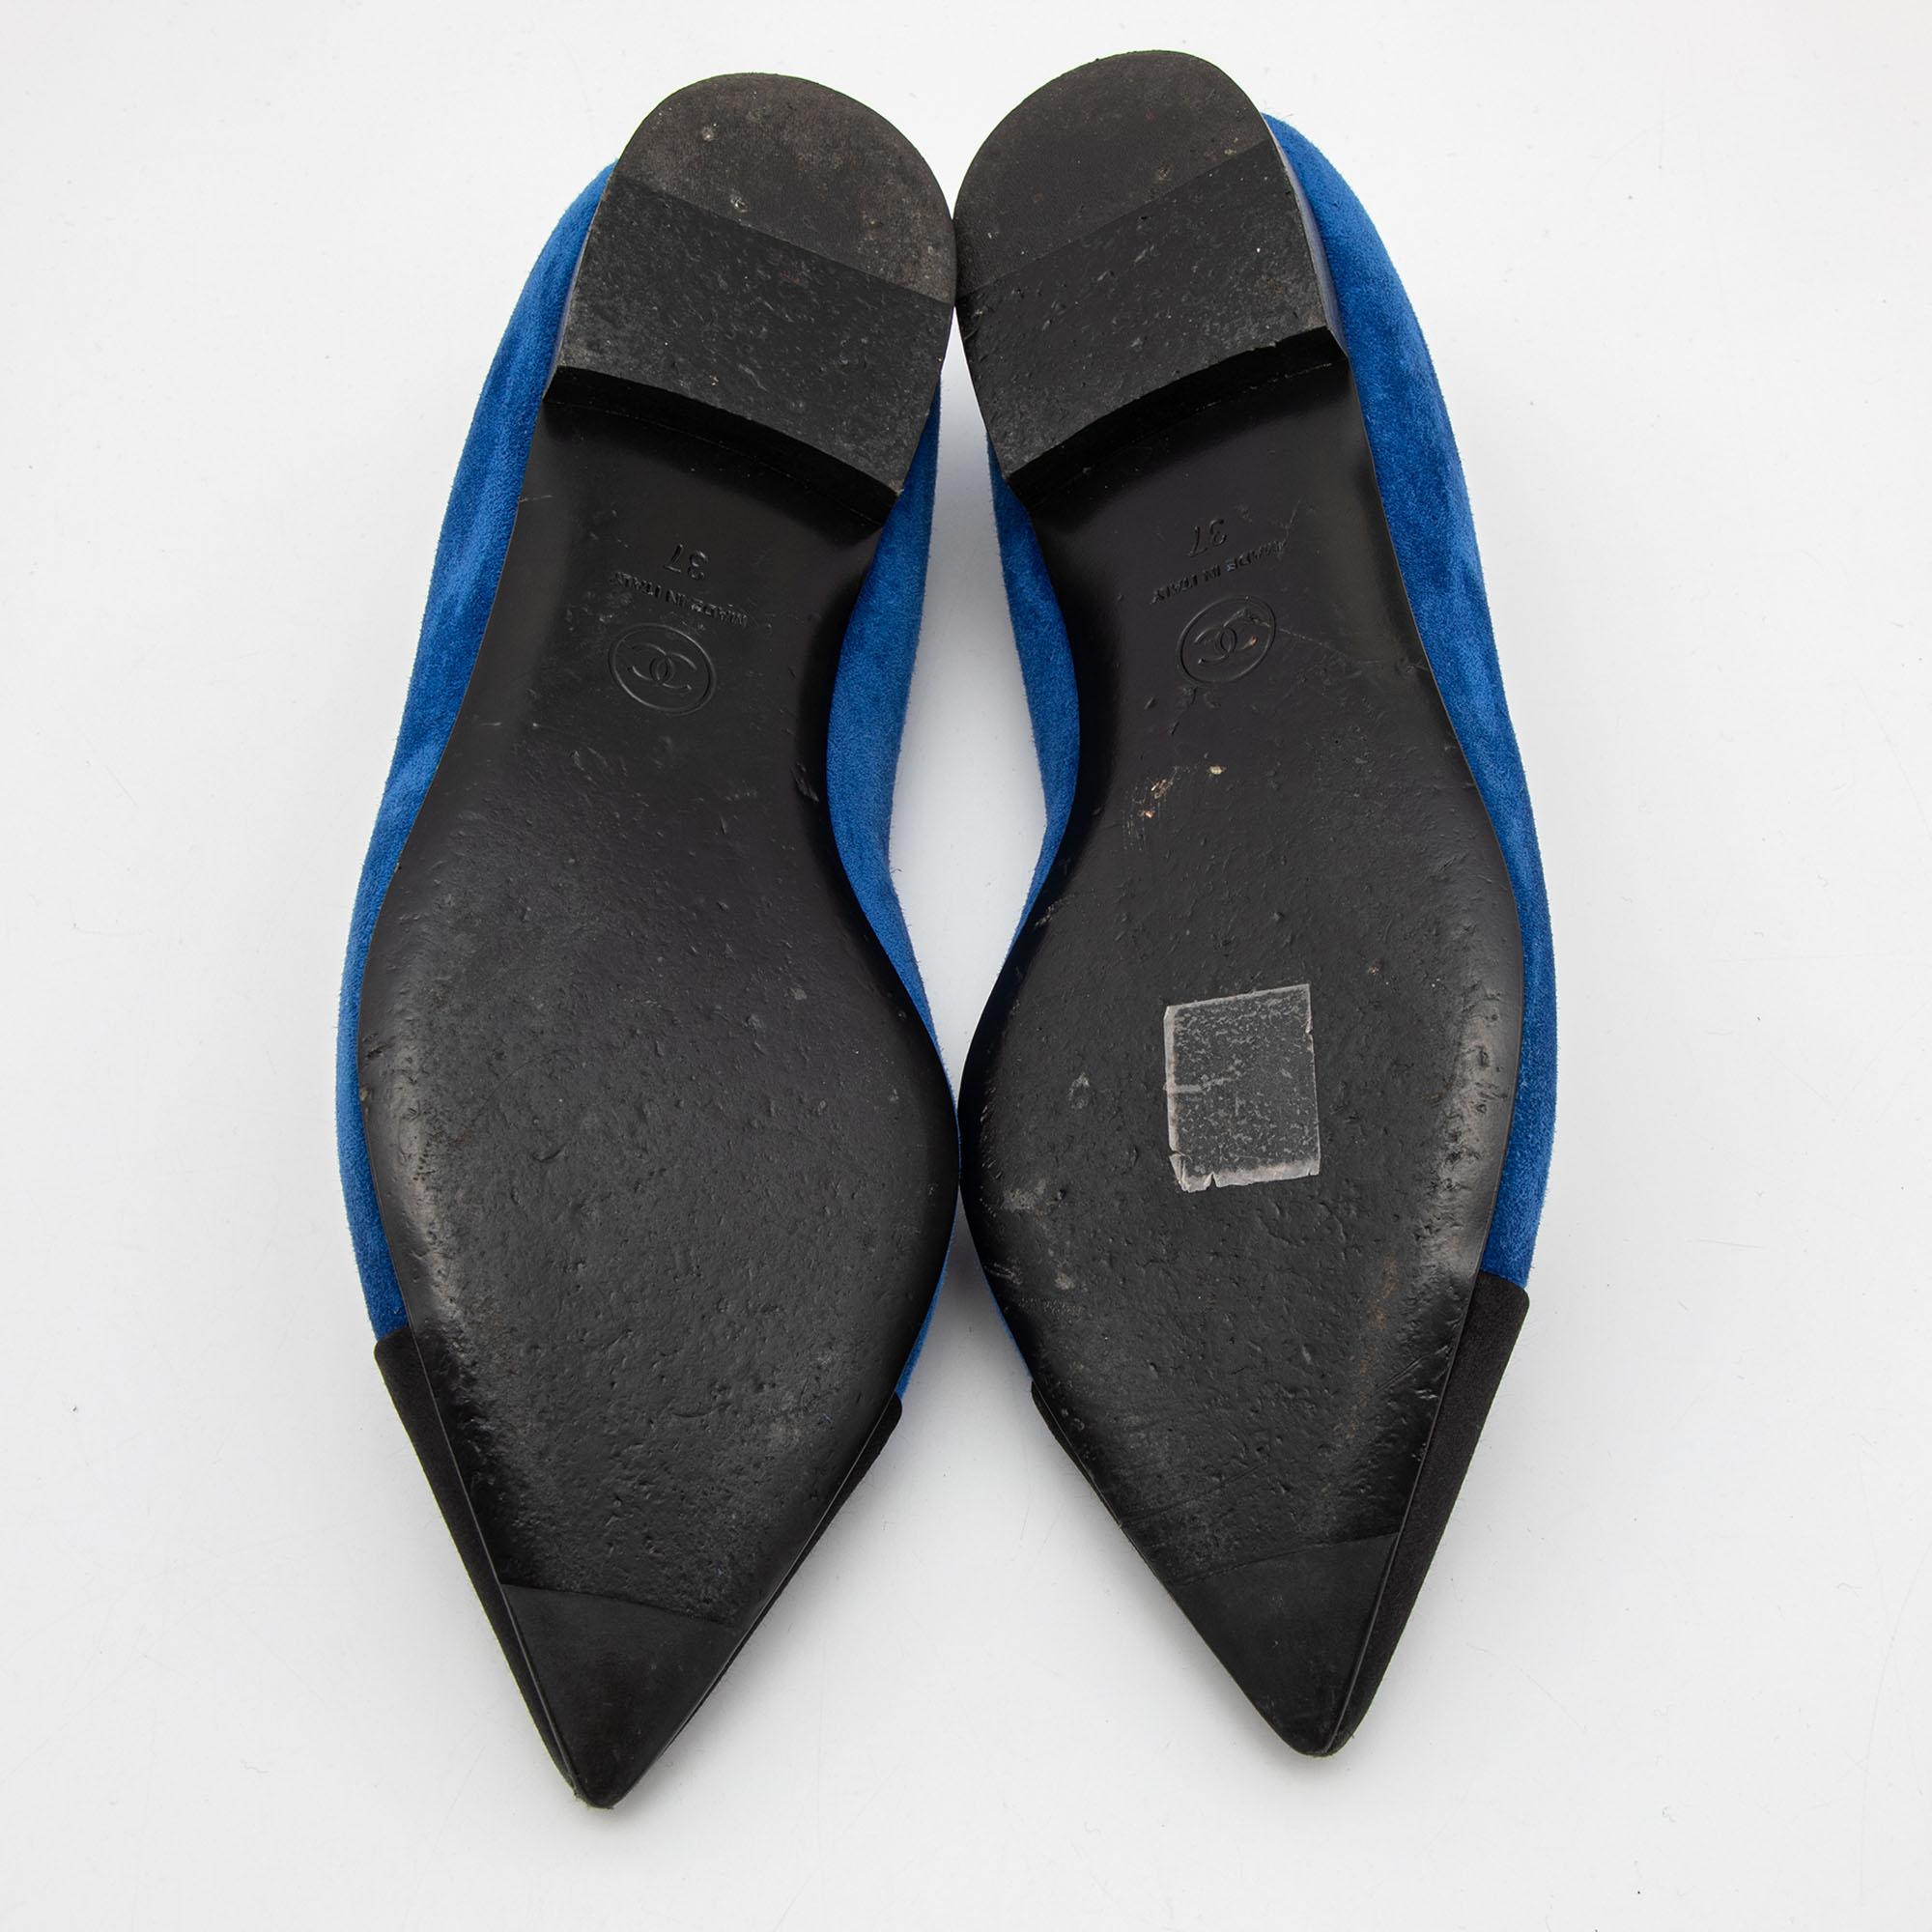 Chanel Blue/Black Satin and Suede Pointed Toe Gabrielle Ballerina Flats Size 37 1